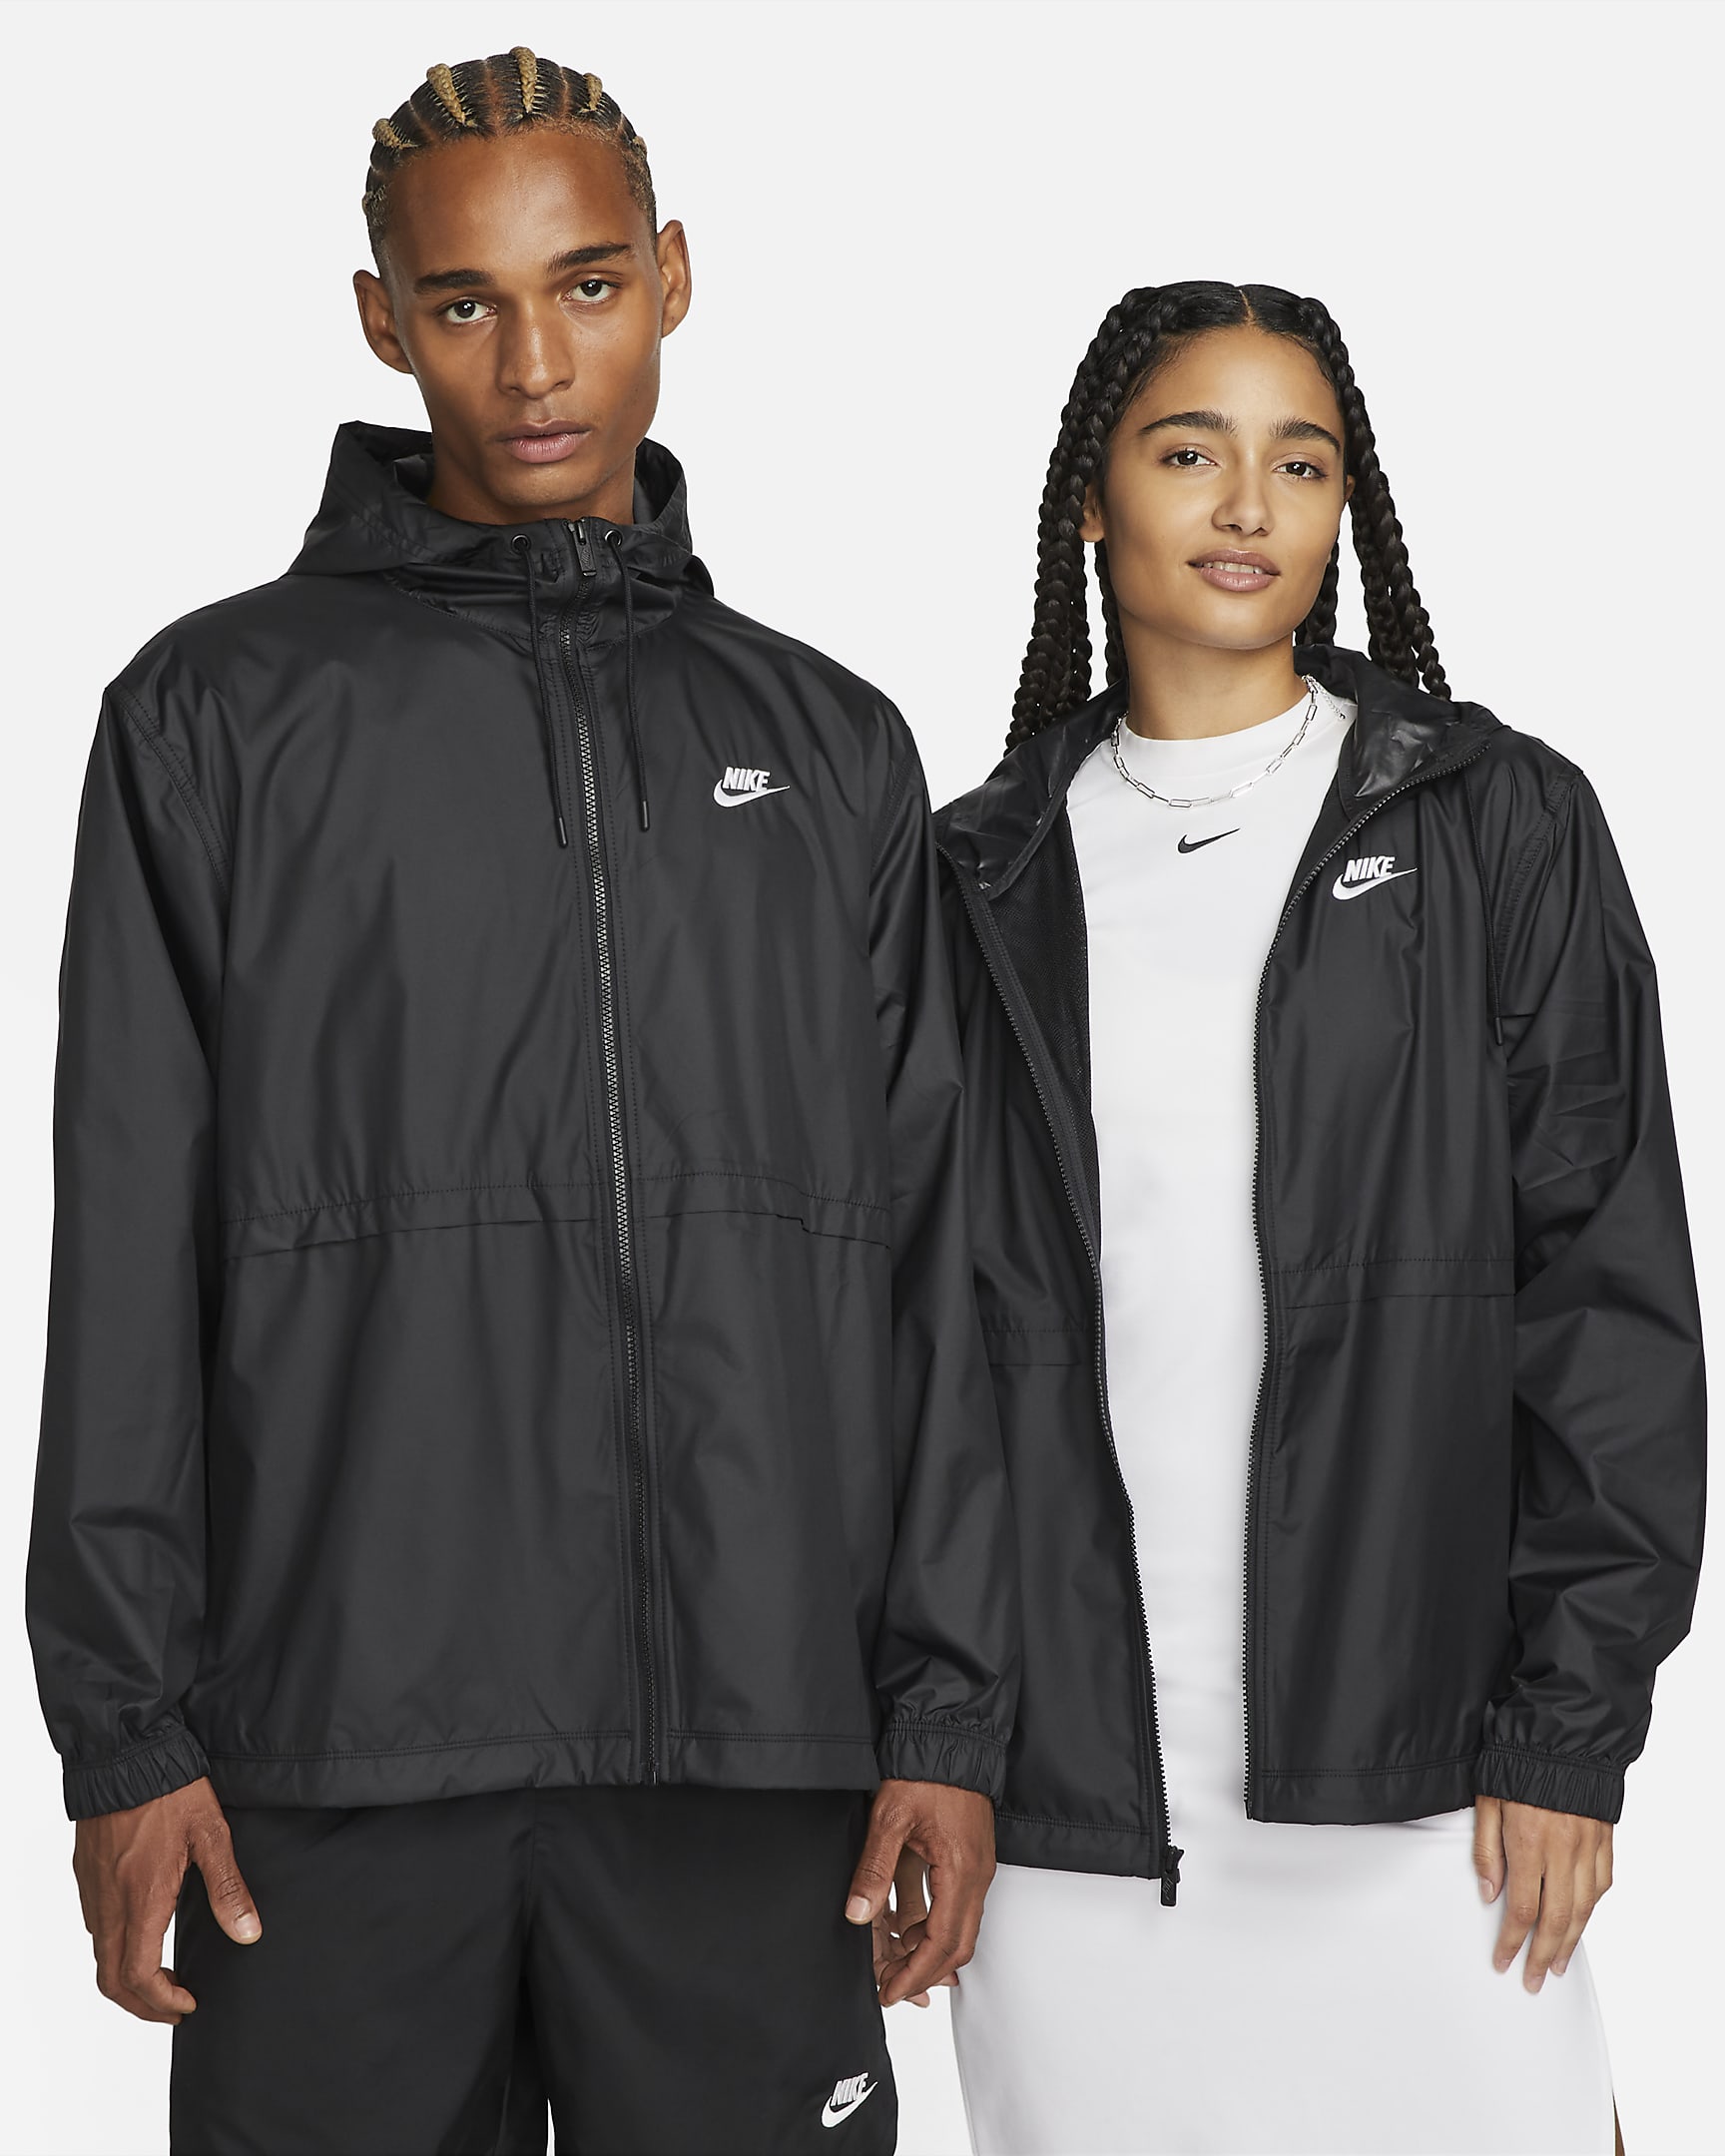 Nike Back to School Sale: Up to 60% off + an extra 20% off on Select Styles